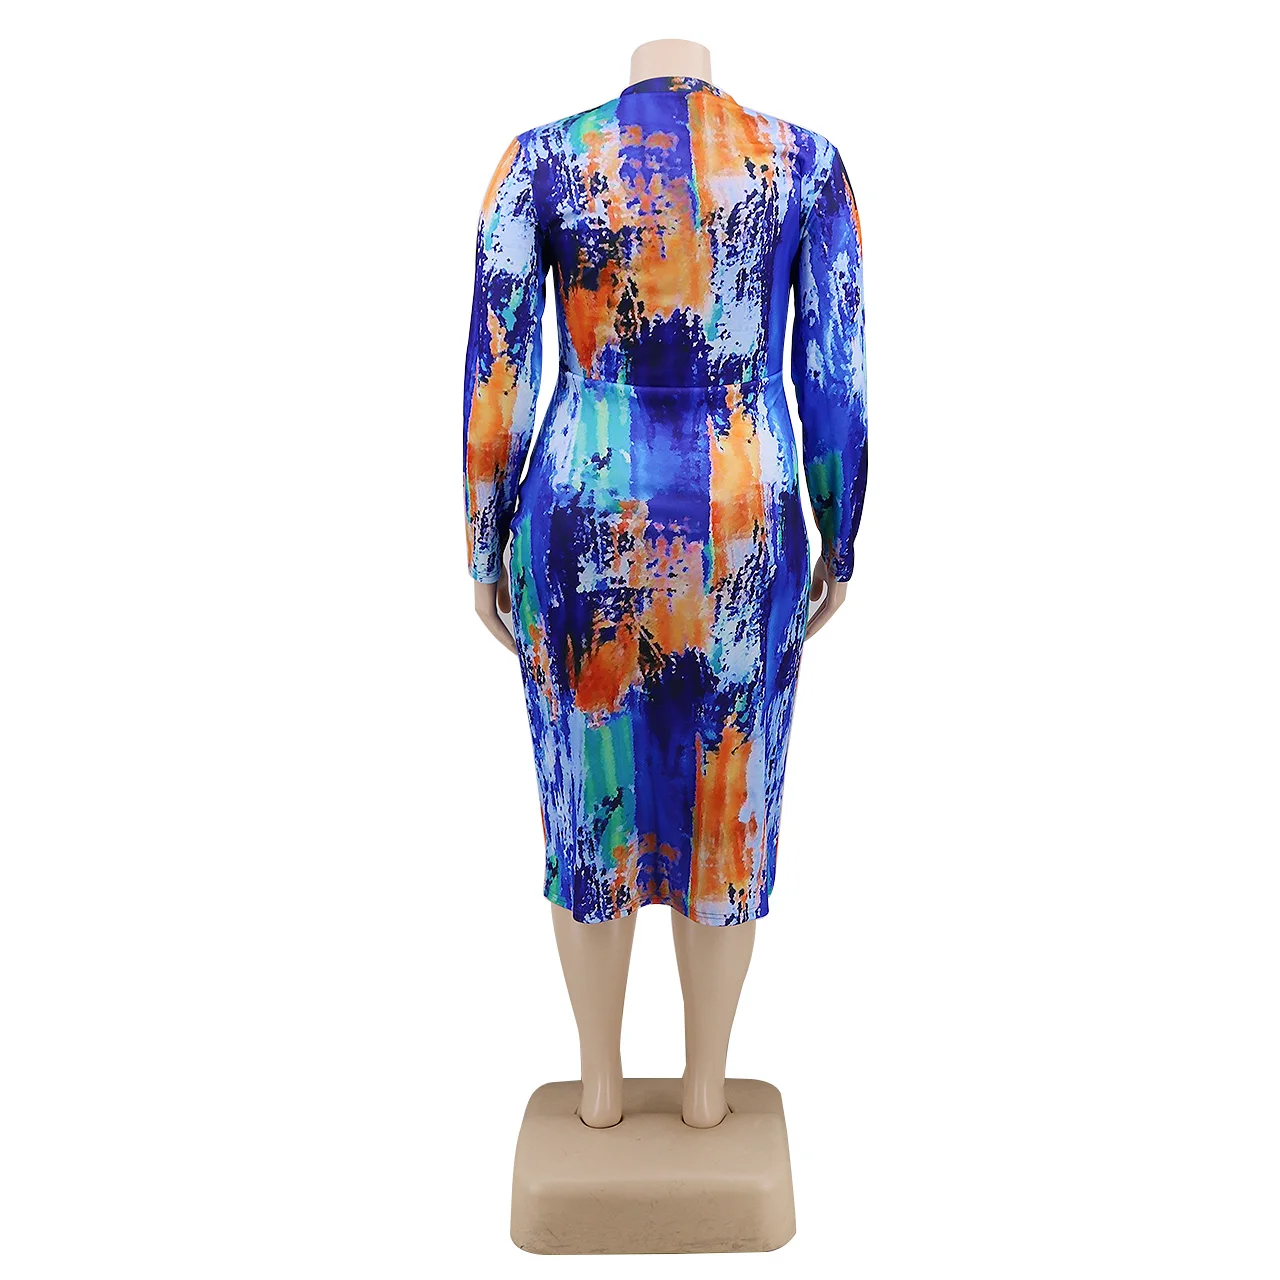 Foma Clothing YF1213 hot selling plus size XL-5XL Fall printed skirt 2020 new women's sexy long sleeve bodycon floral dress